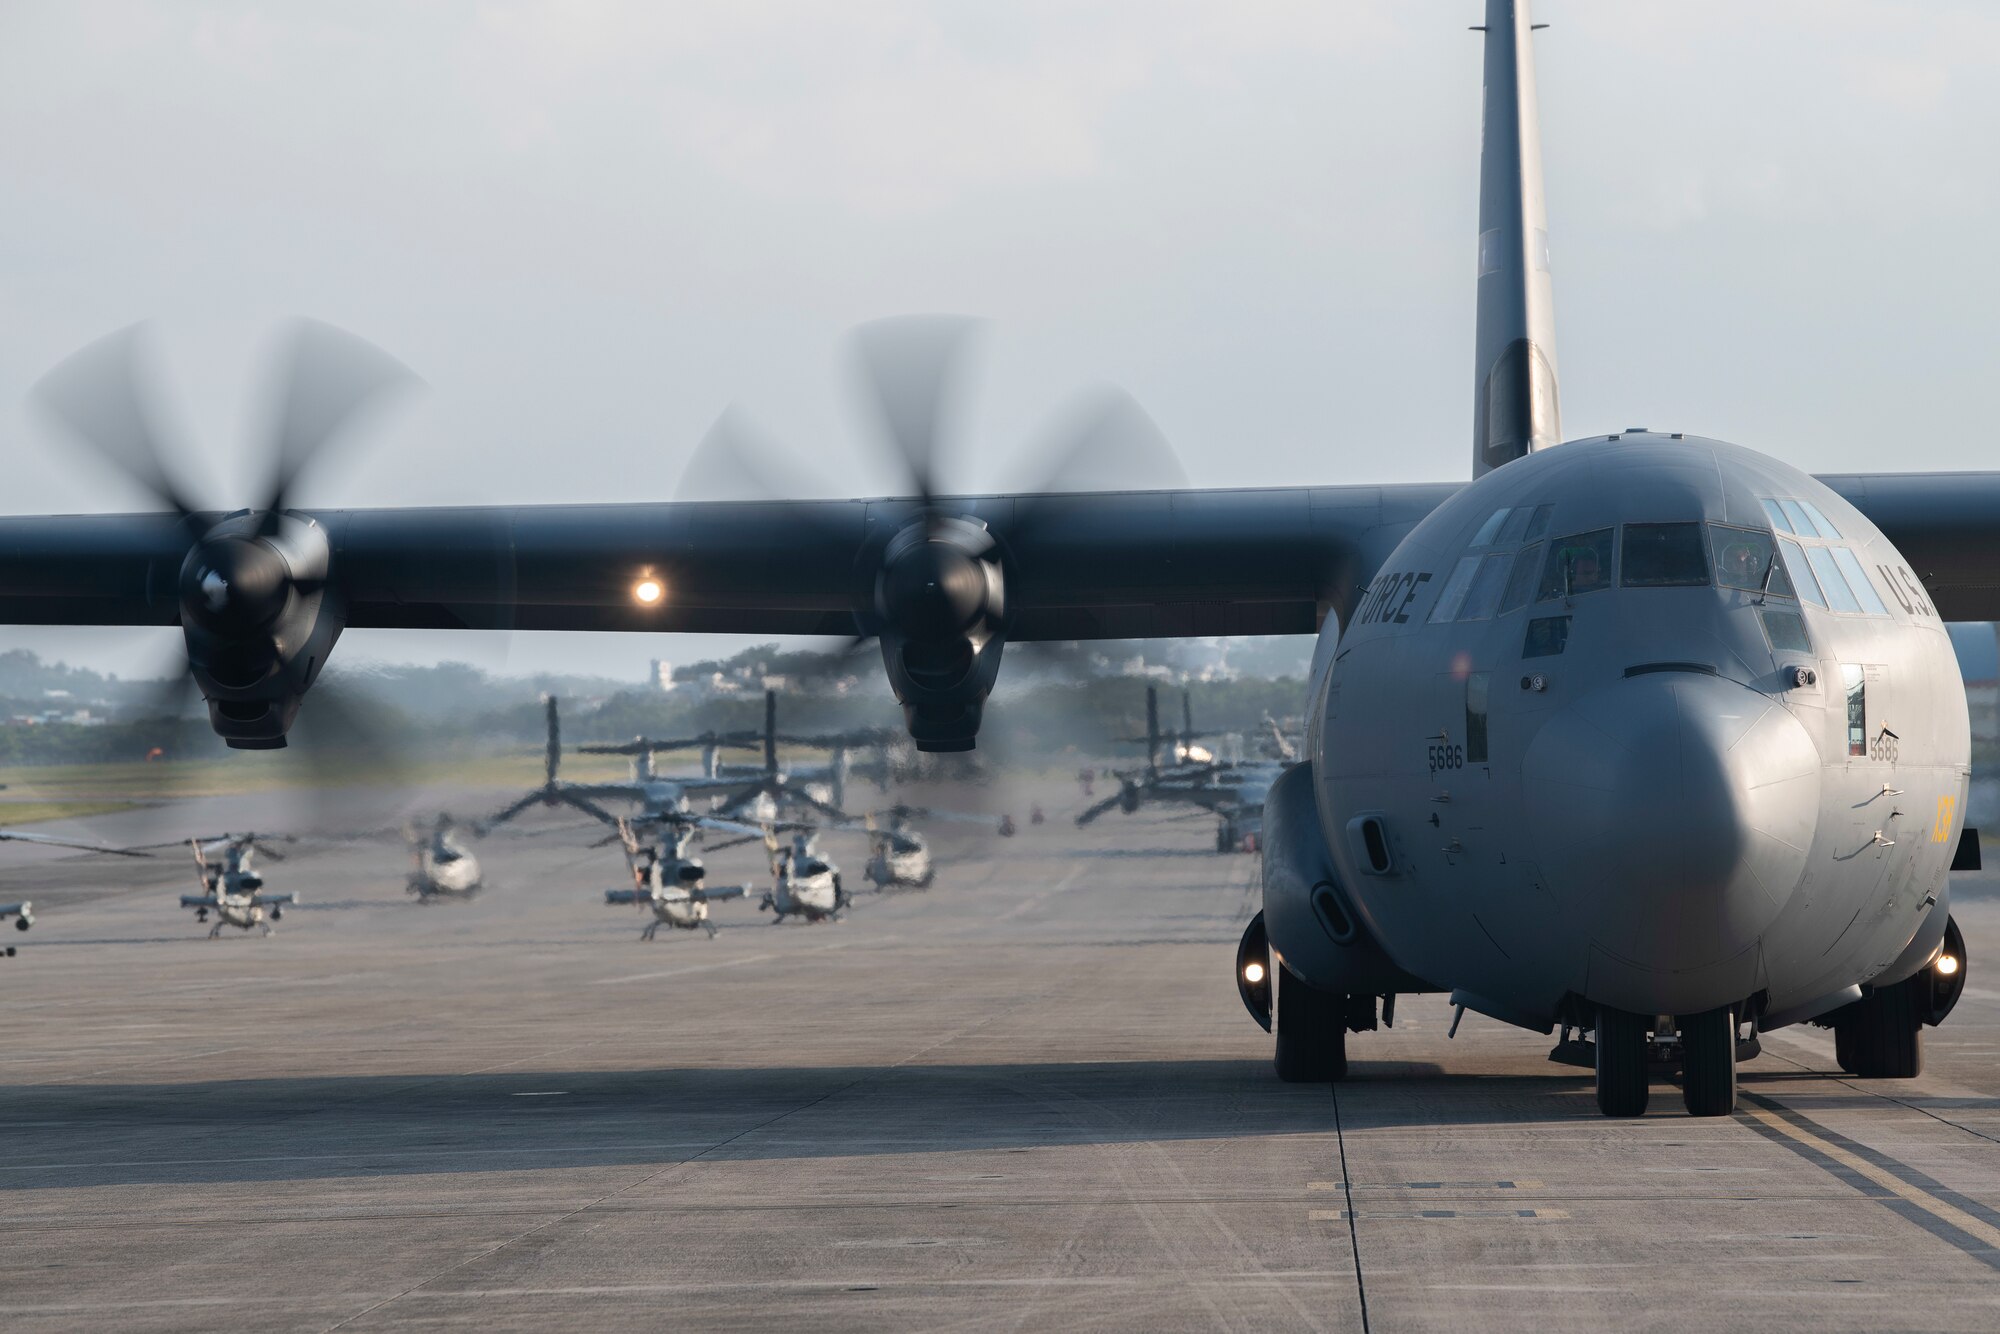 A U.S. Air Force C-130J Super Hercules, from Dyess Air Force Base, Texas, taxis to a parking spot during an Agile Combat Employment exercise Feb. 21, 2020, at Marine Corps Air Station Futenma, Japan. Exercises that utilize ACE concepts ensure forward-deployed forces in the Indo-Pacific are ready to protect and defend partners, allies and U.S. interests at a moment’s notice. (U.S. Air Force photo by Senior Airman Rhett Isbell)